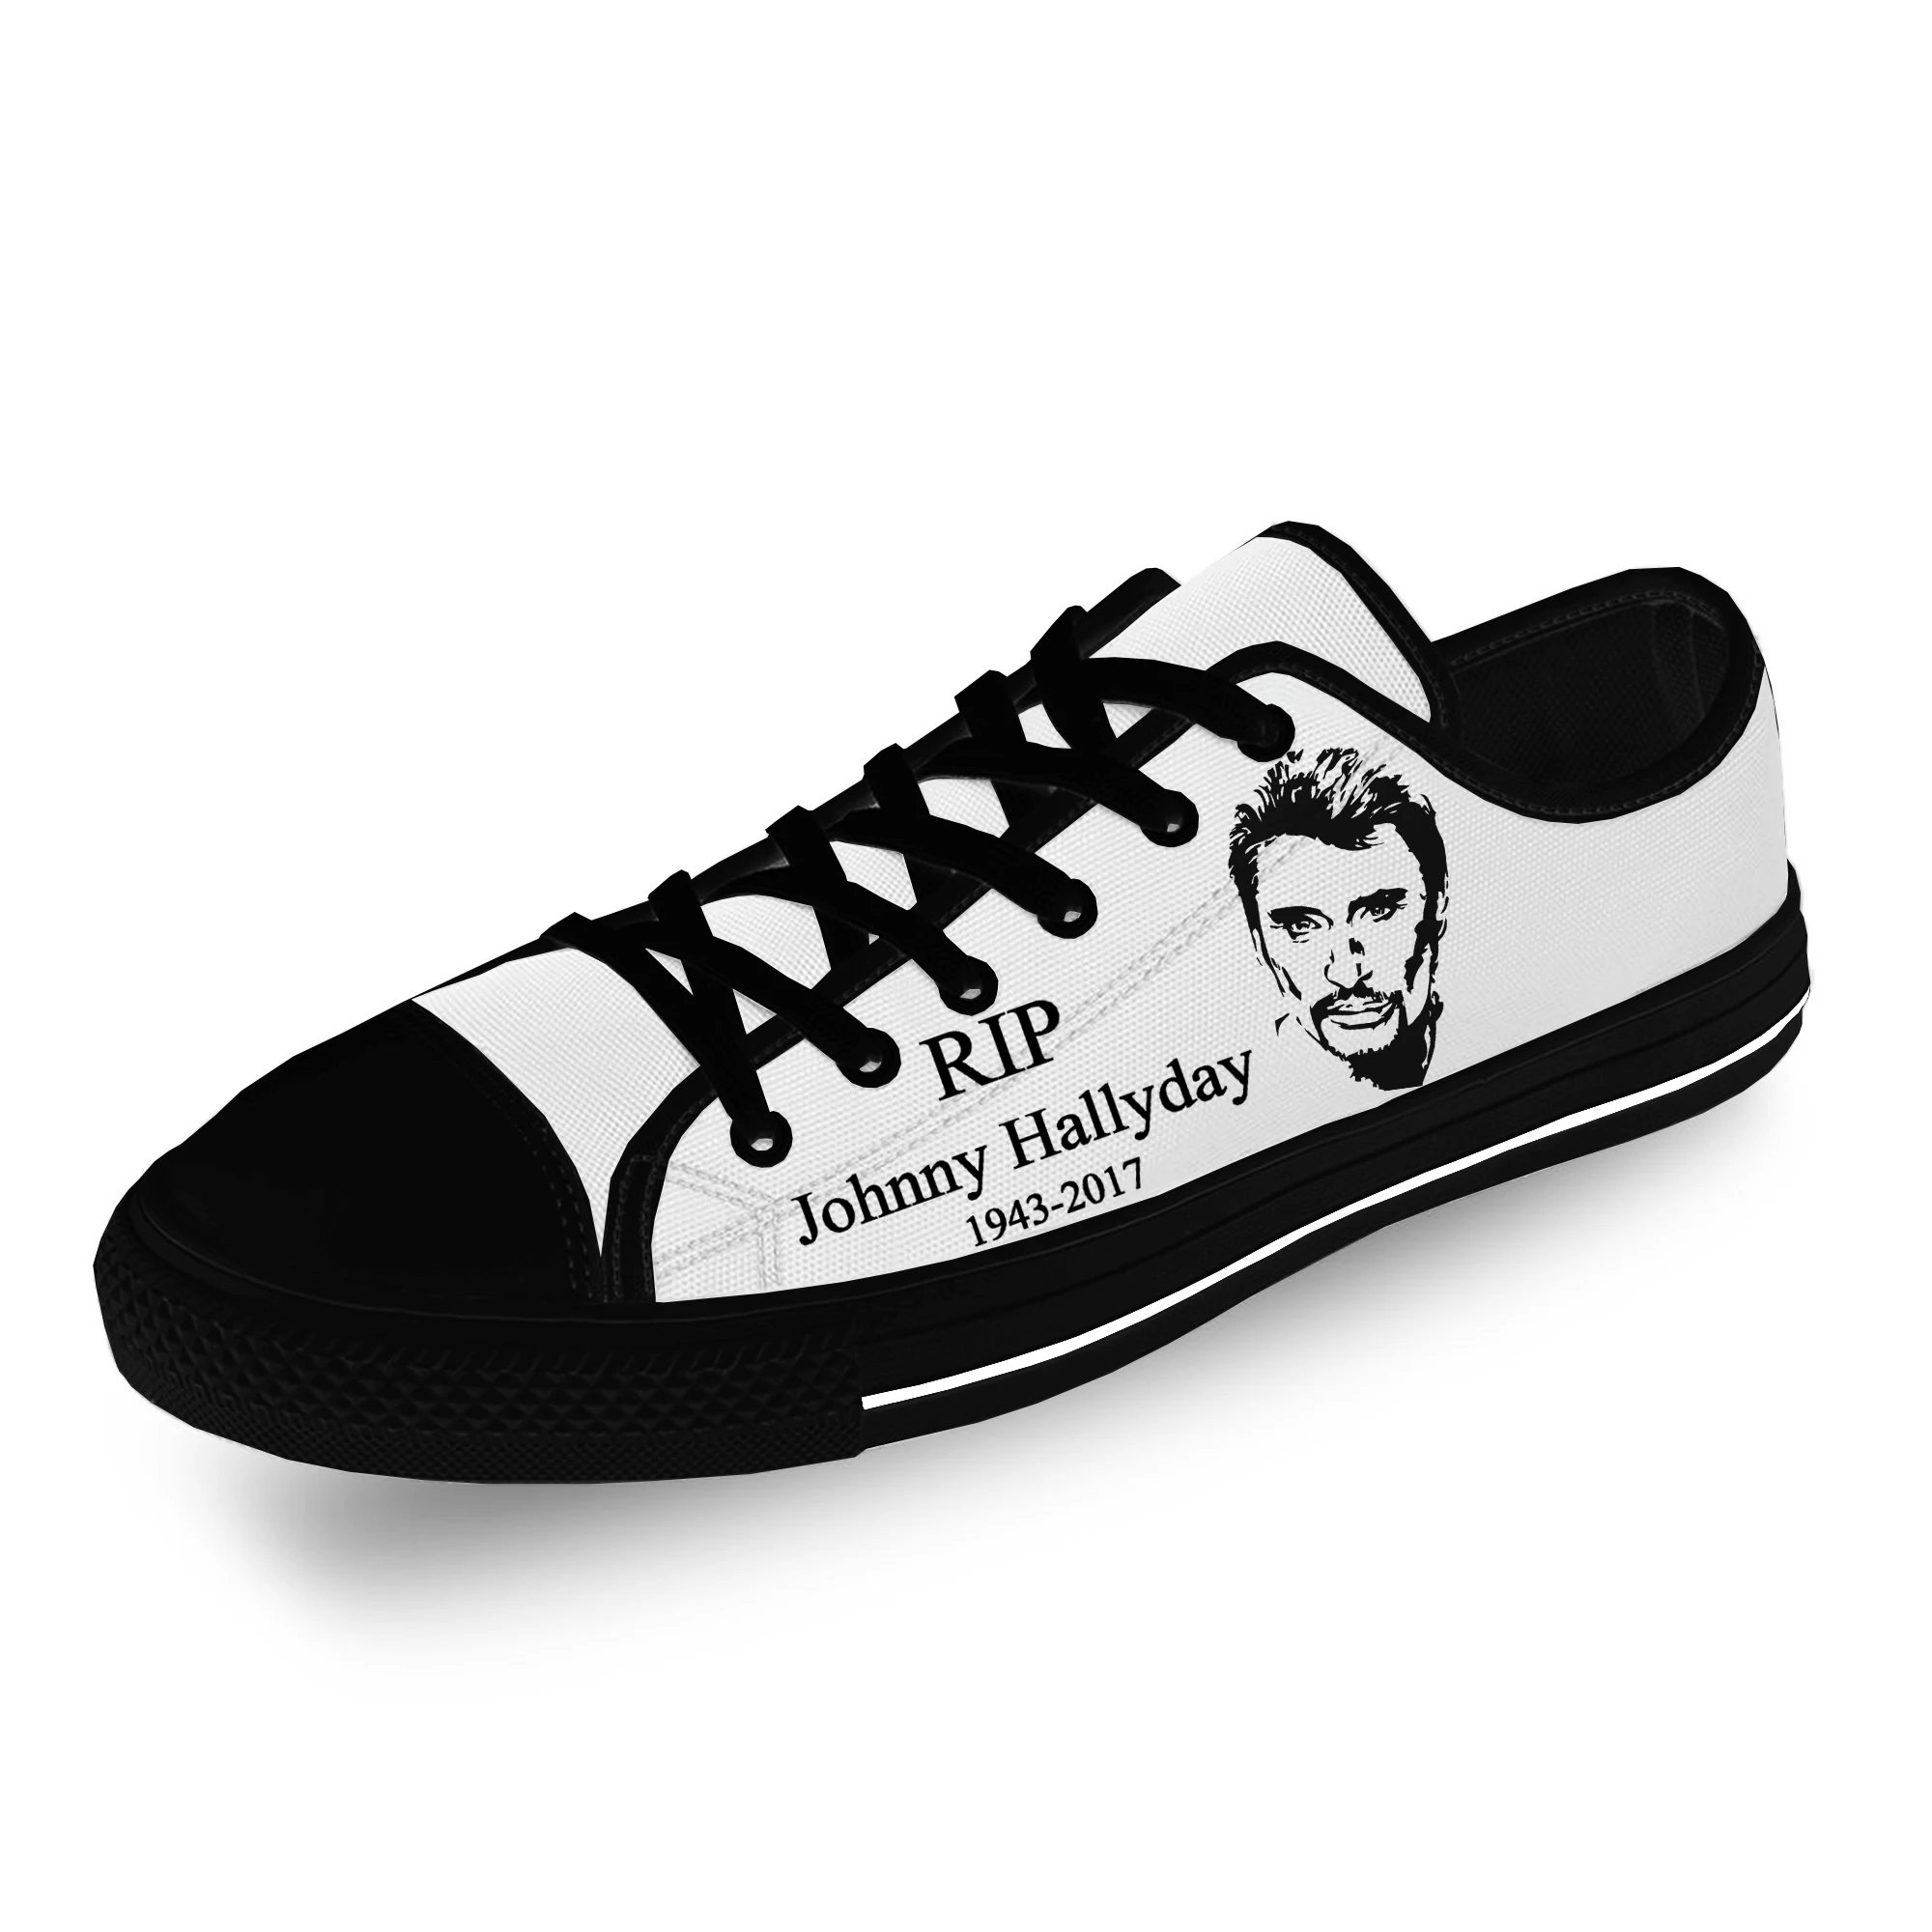 

French Star Johnny Hallyday High Top Sneakers Mens Womens Teenager Casual Shoes Canvas Running Shoes 3D Print Lightweight shoe